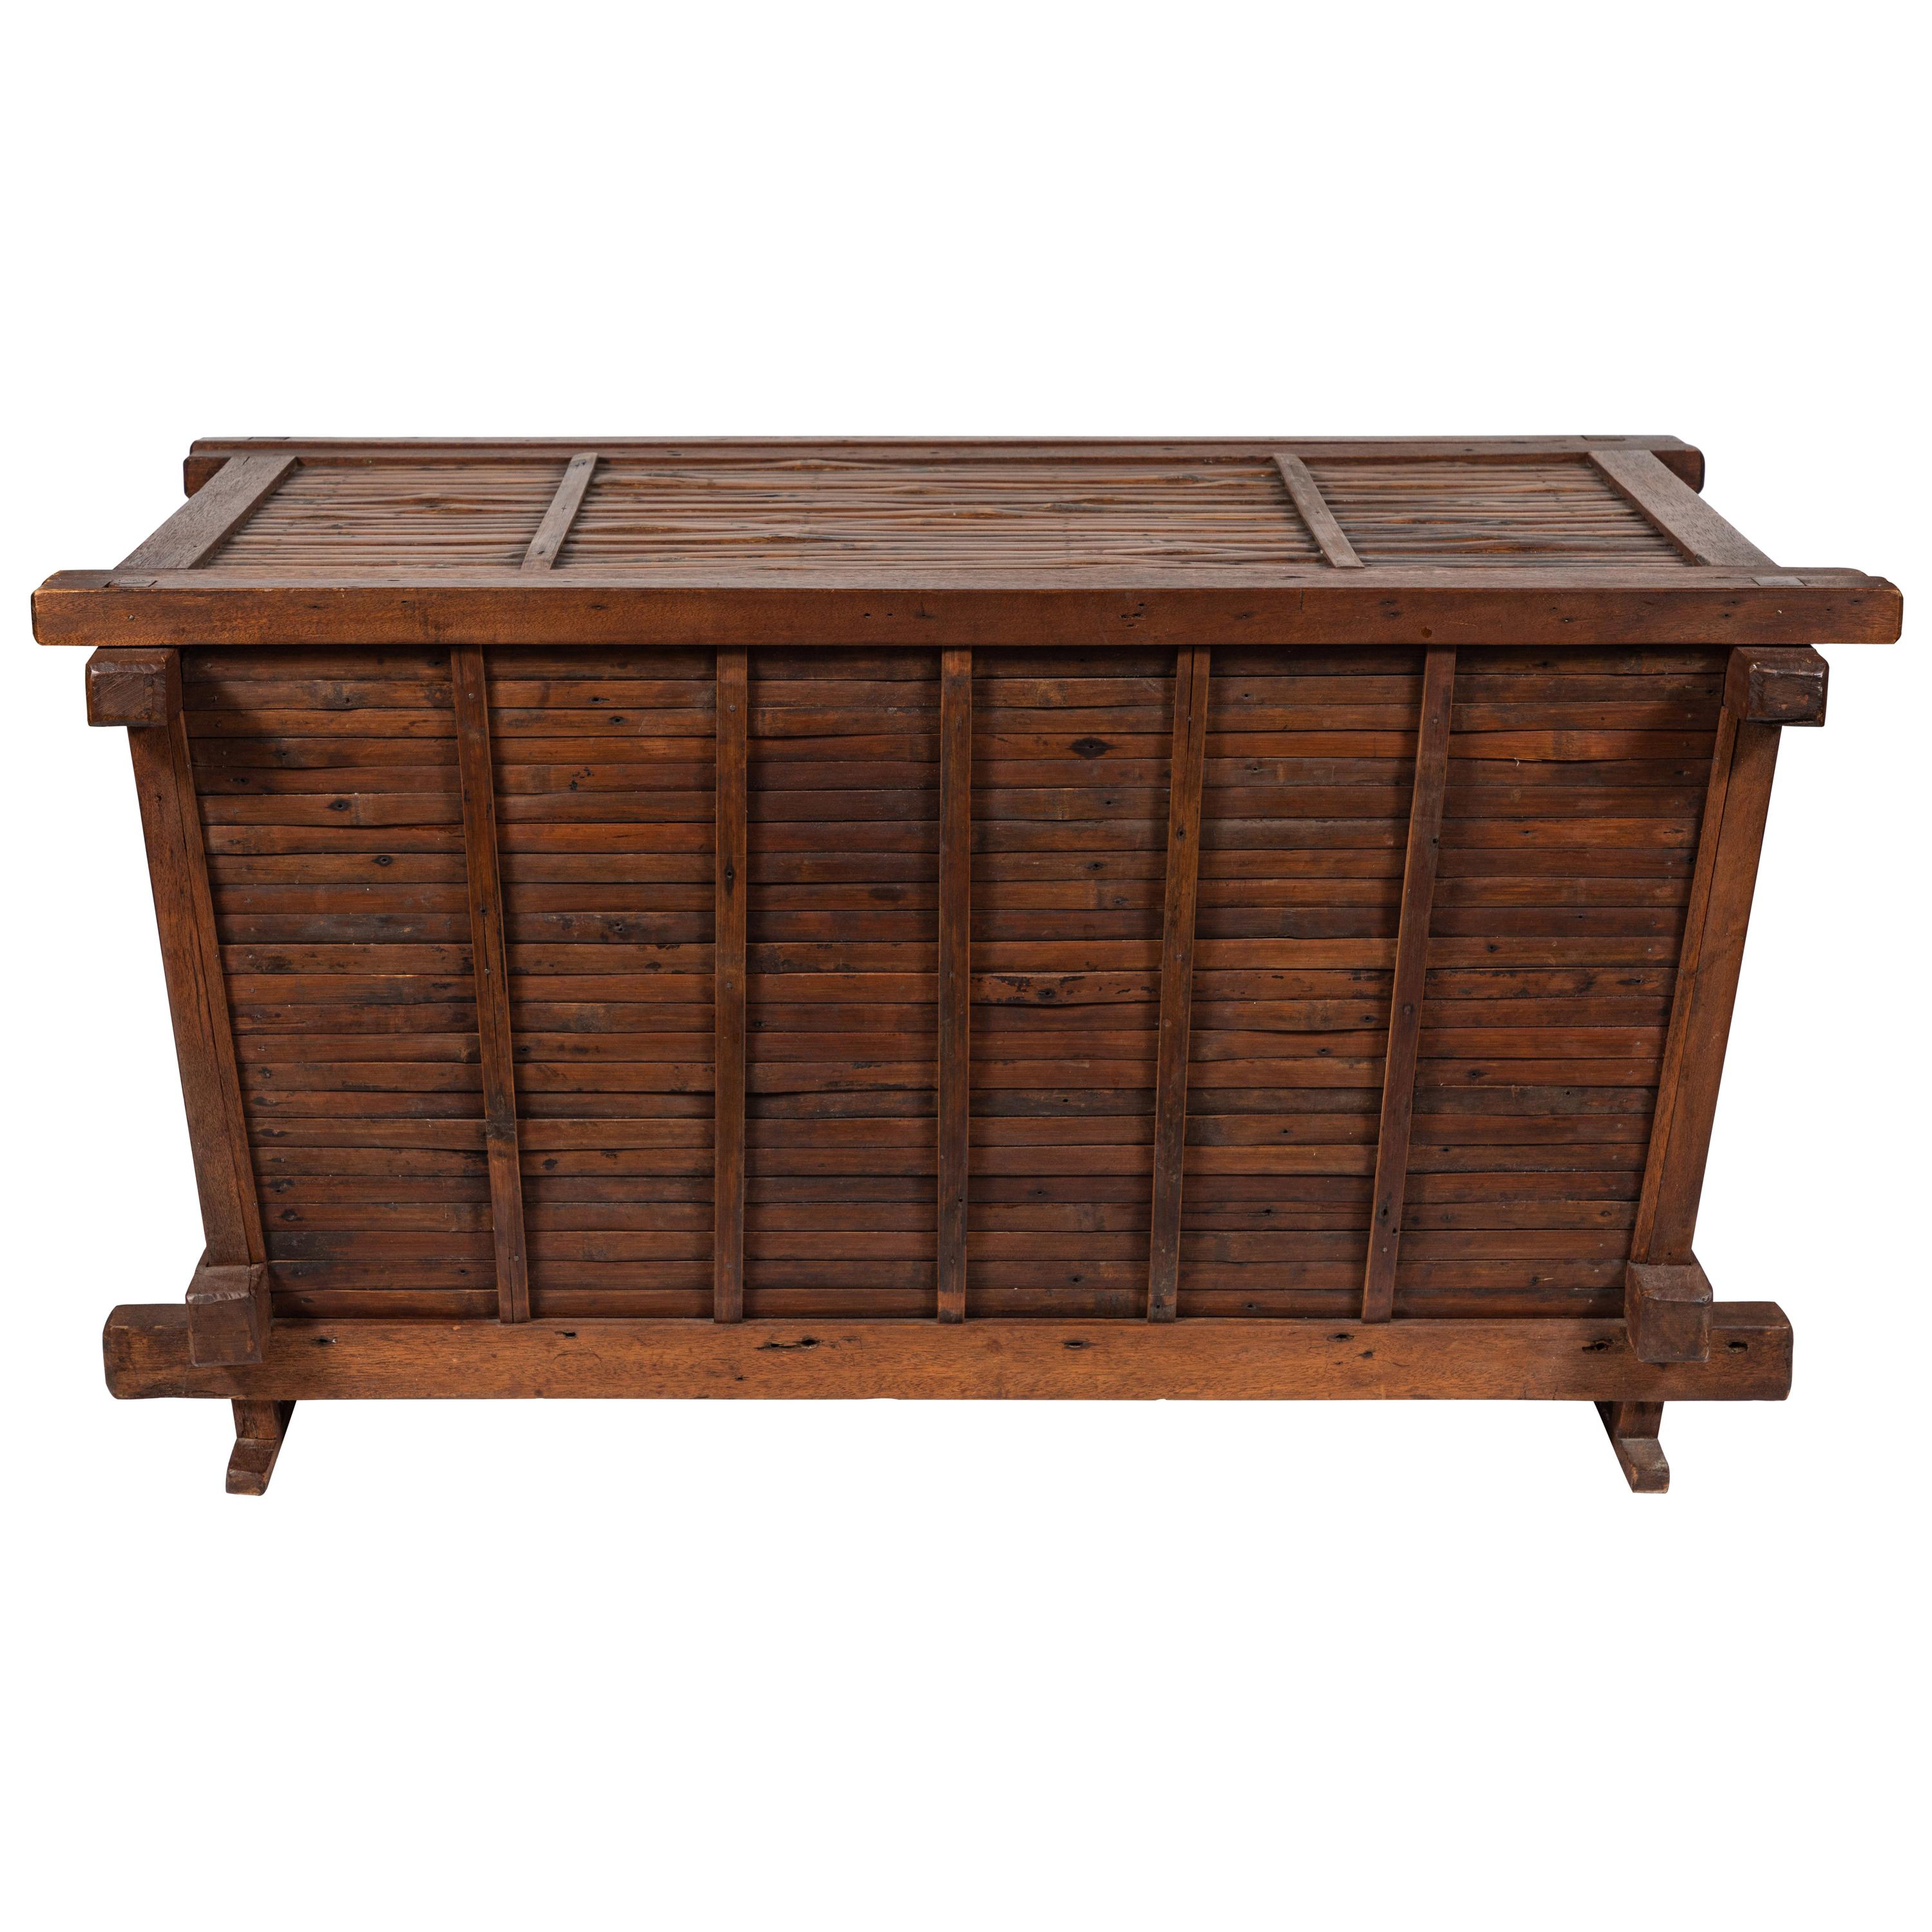 Vintage Chinese Trunk Made of Bamboo and Elm